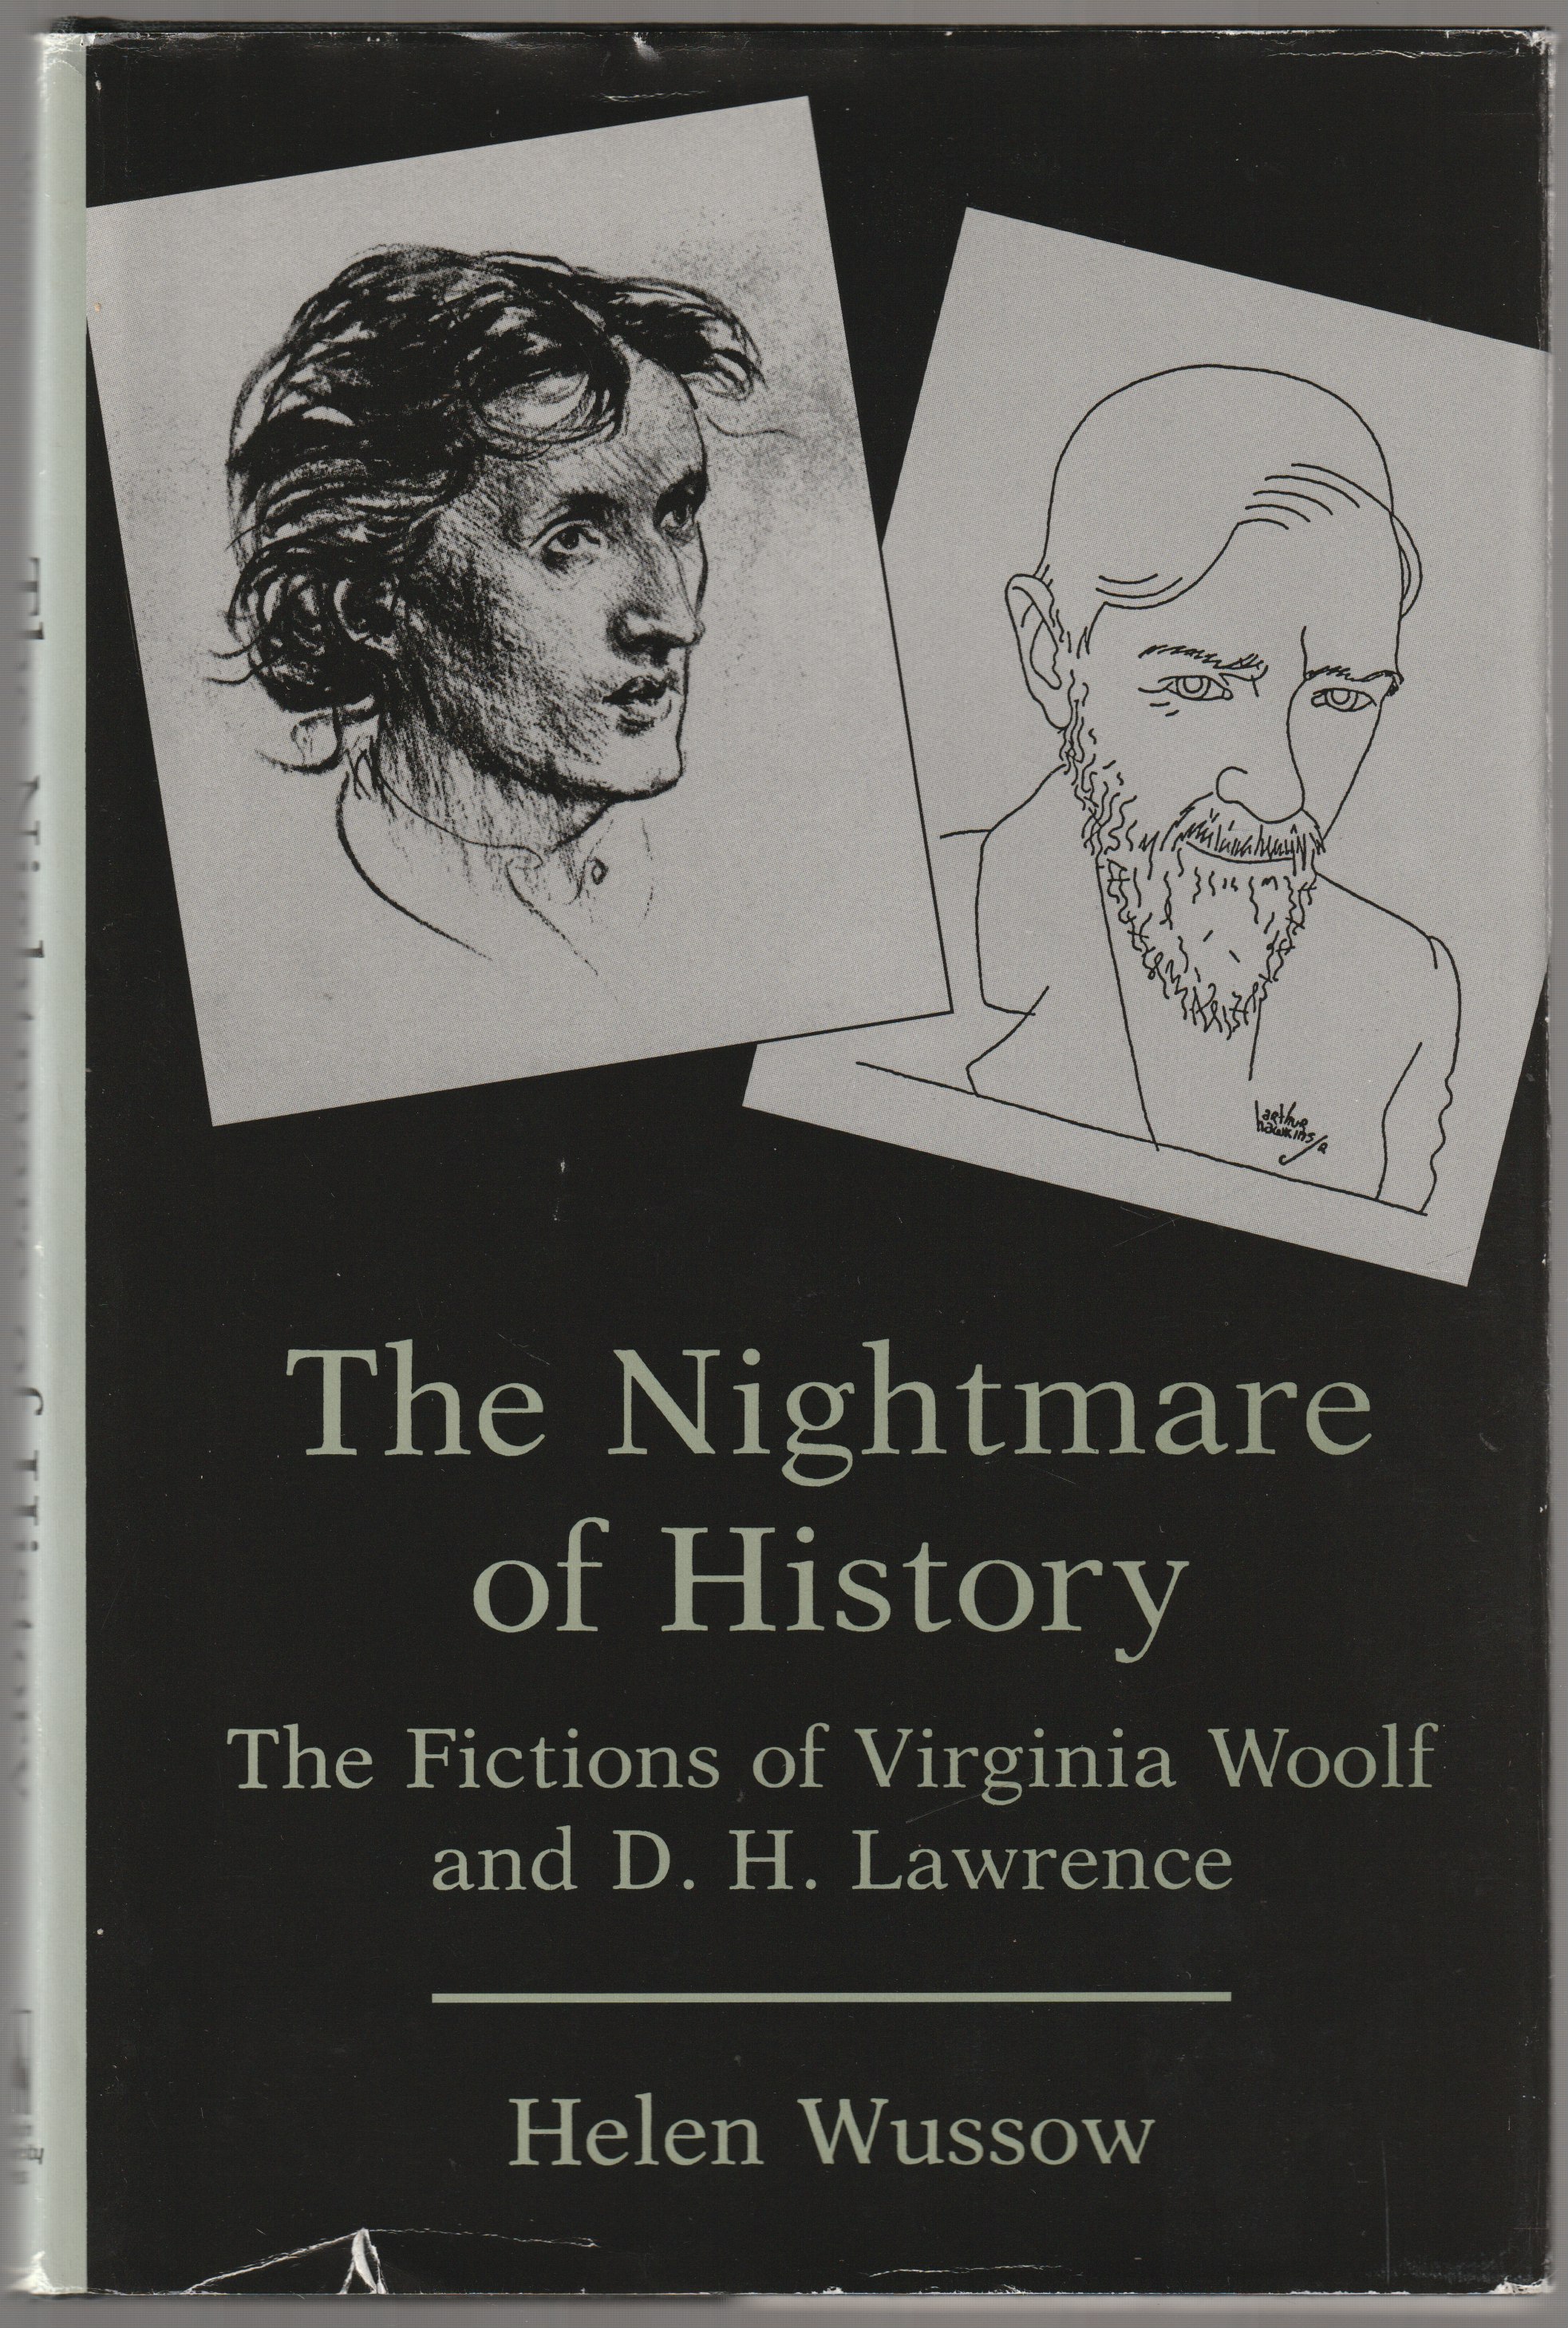 The nightmare of history : the fictions of Virginia Woolf and D.H. Lawrence.